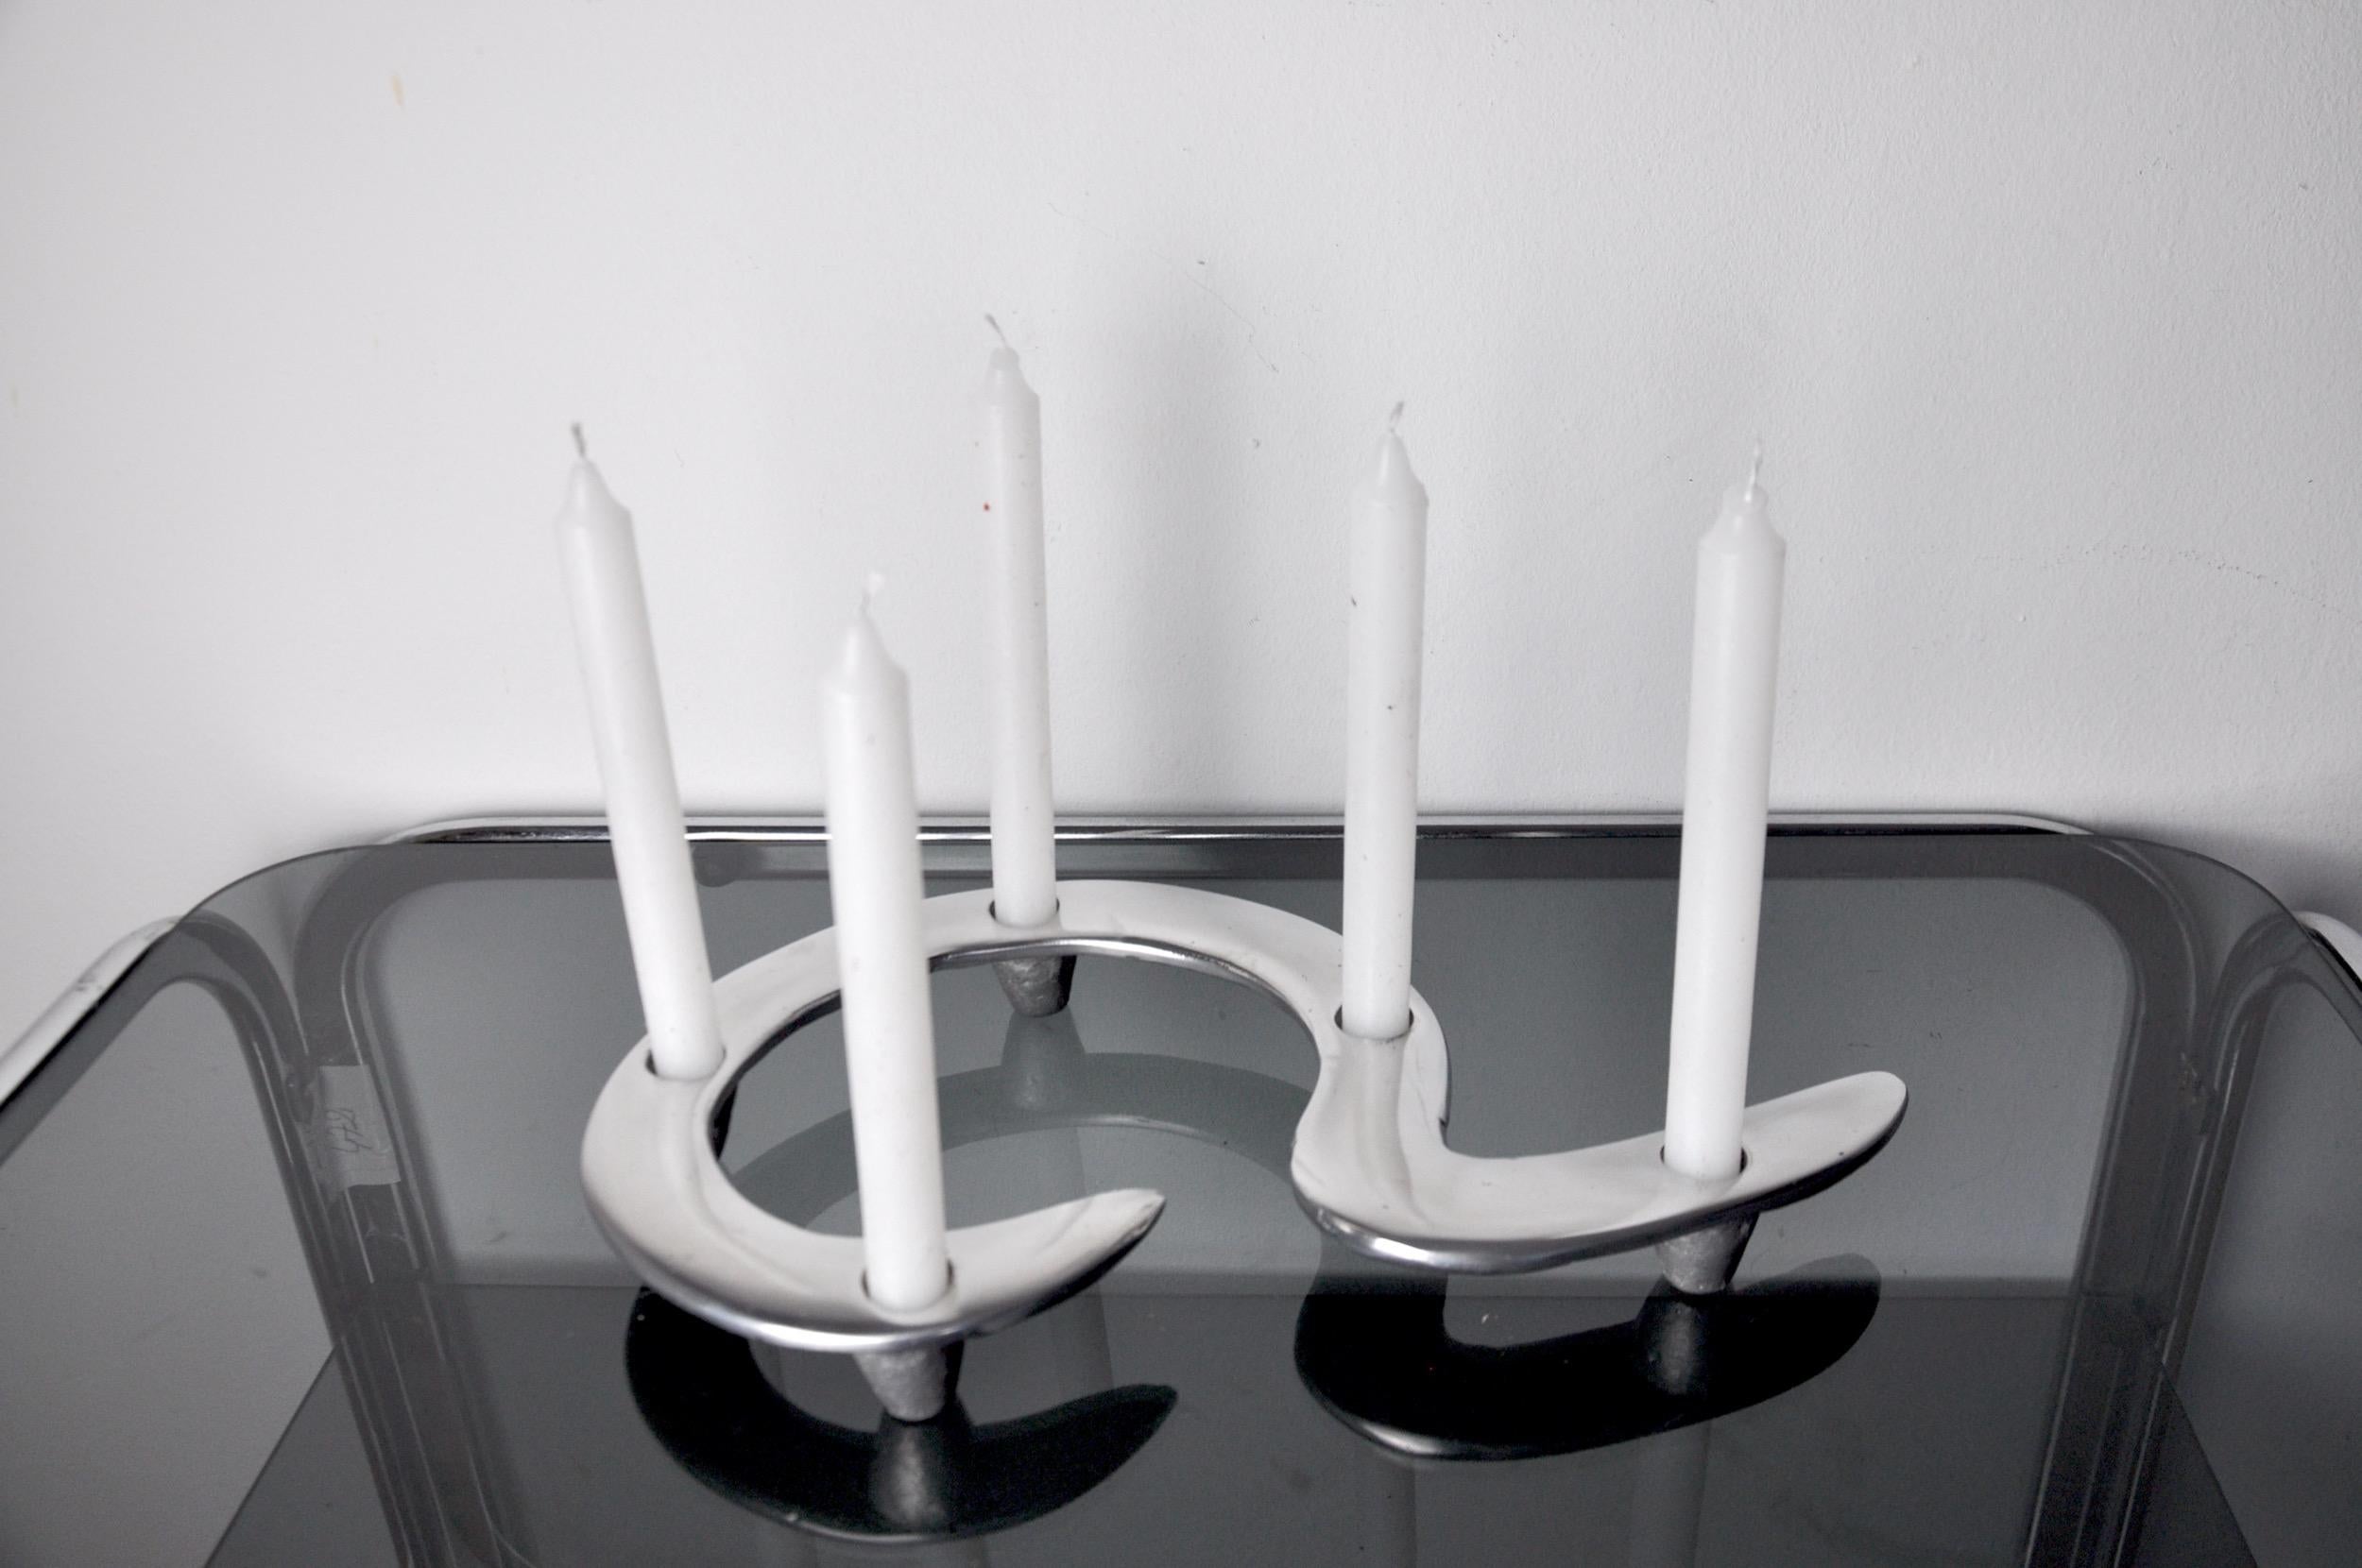 Zigzag candle holder designed and produced by matthew hilton in england in the 1980s.

Brutalist style solid aluminum candlesticks that can accommodate 5 candles.

Beautiful decorative object that will bring a real design touch to your